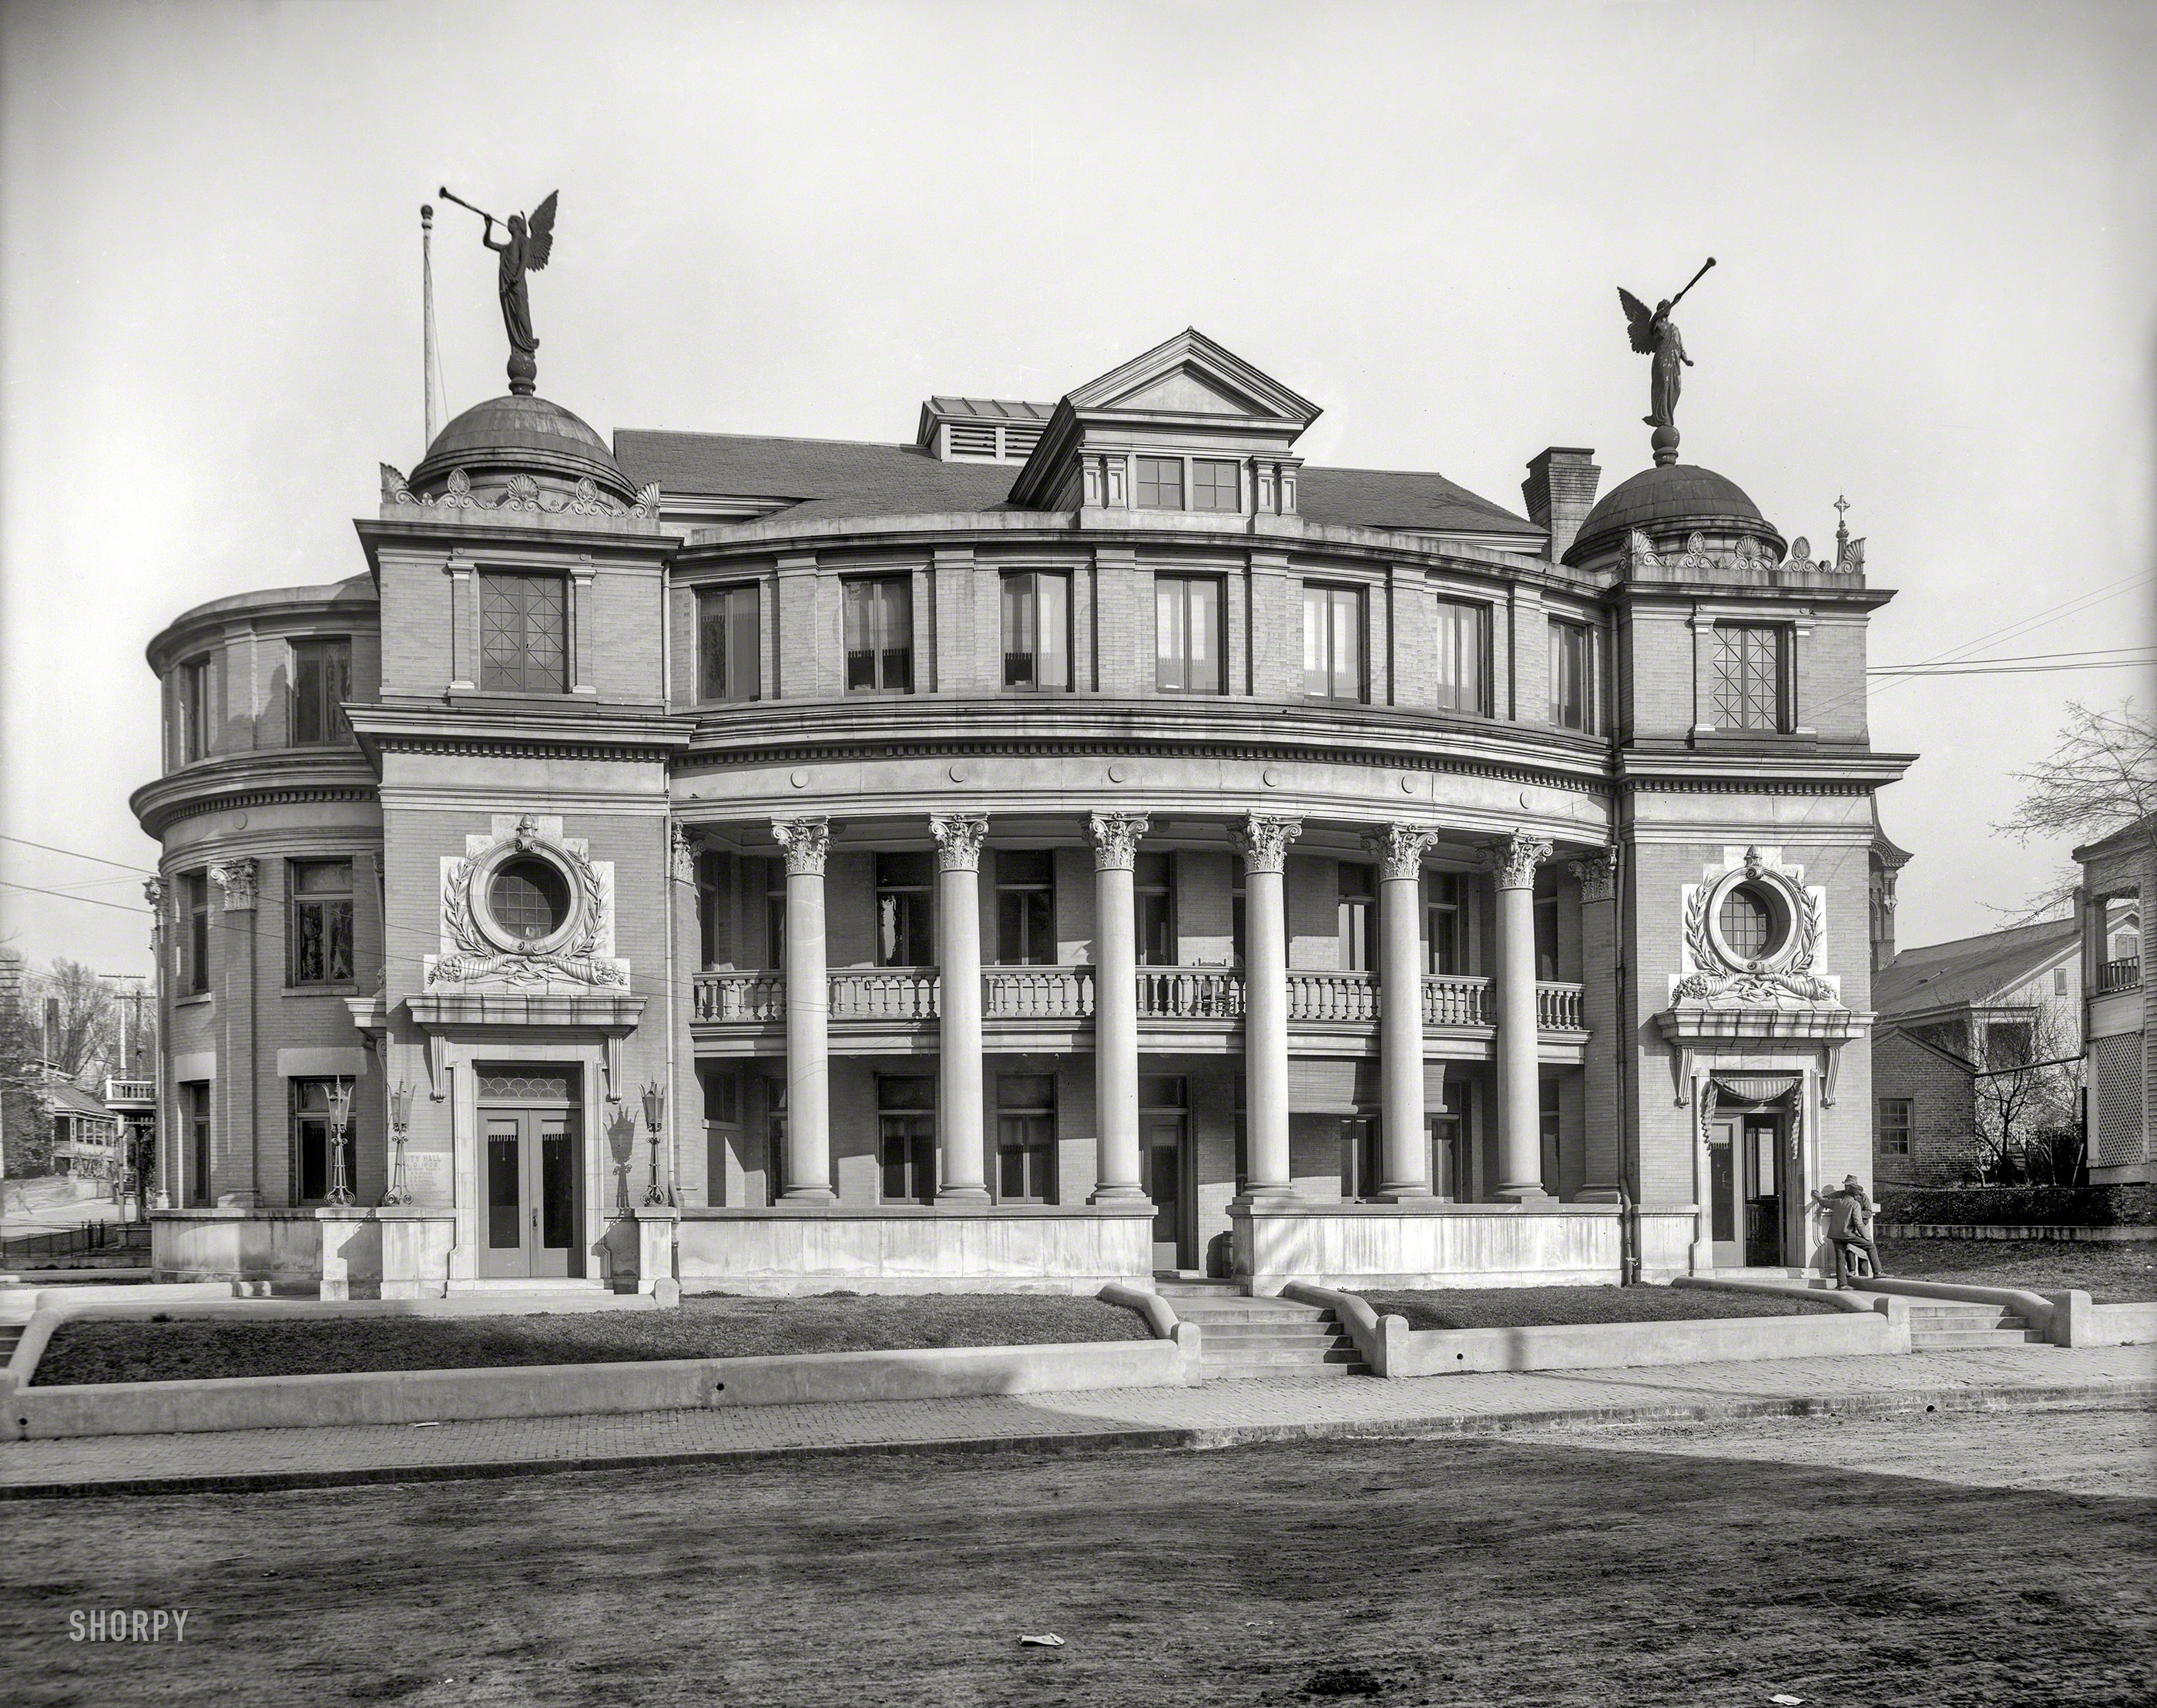 1906. "City Hall -- Vicksburg, Mississippi." The building still stands, although the angels have flown. 8x10 inch dry plate glass negative, Detroit Publishing Company. View full size.